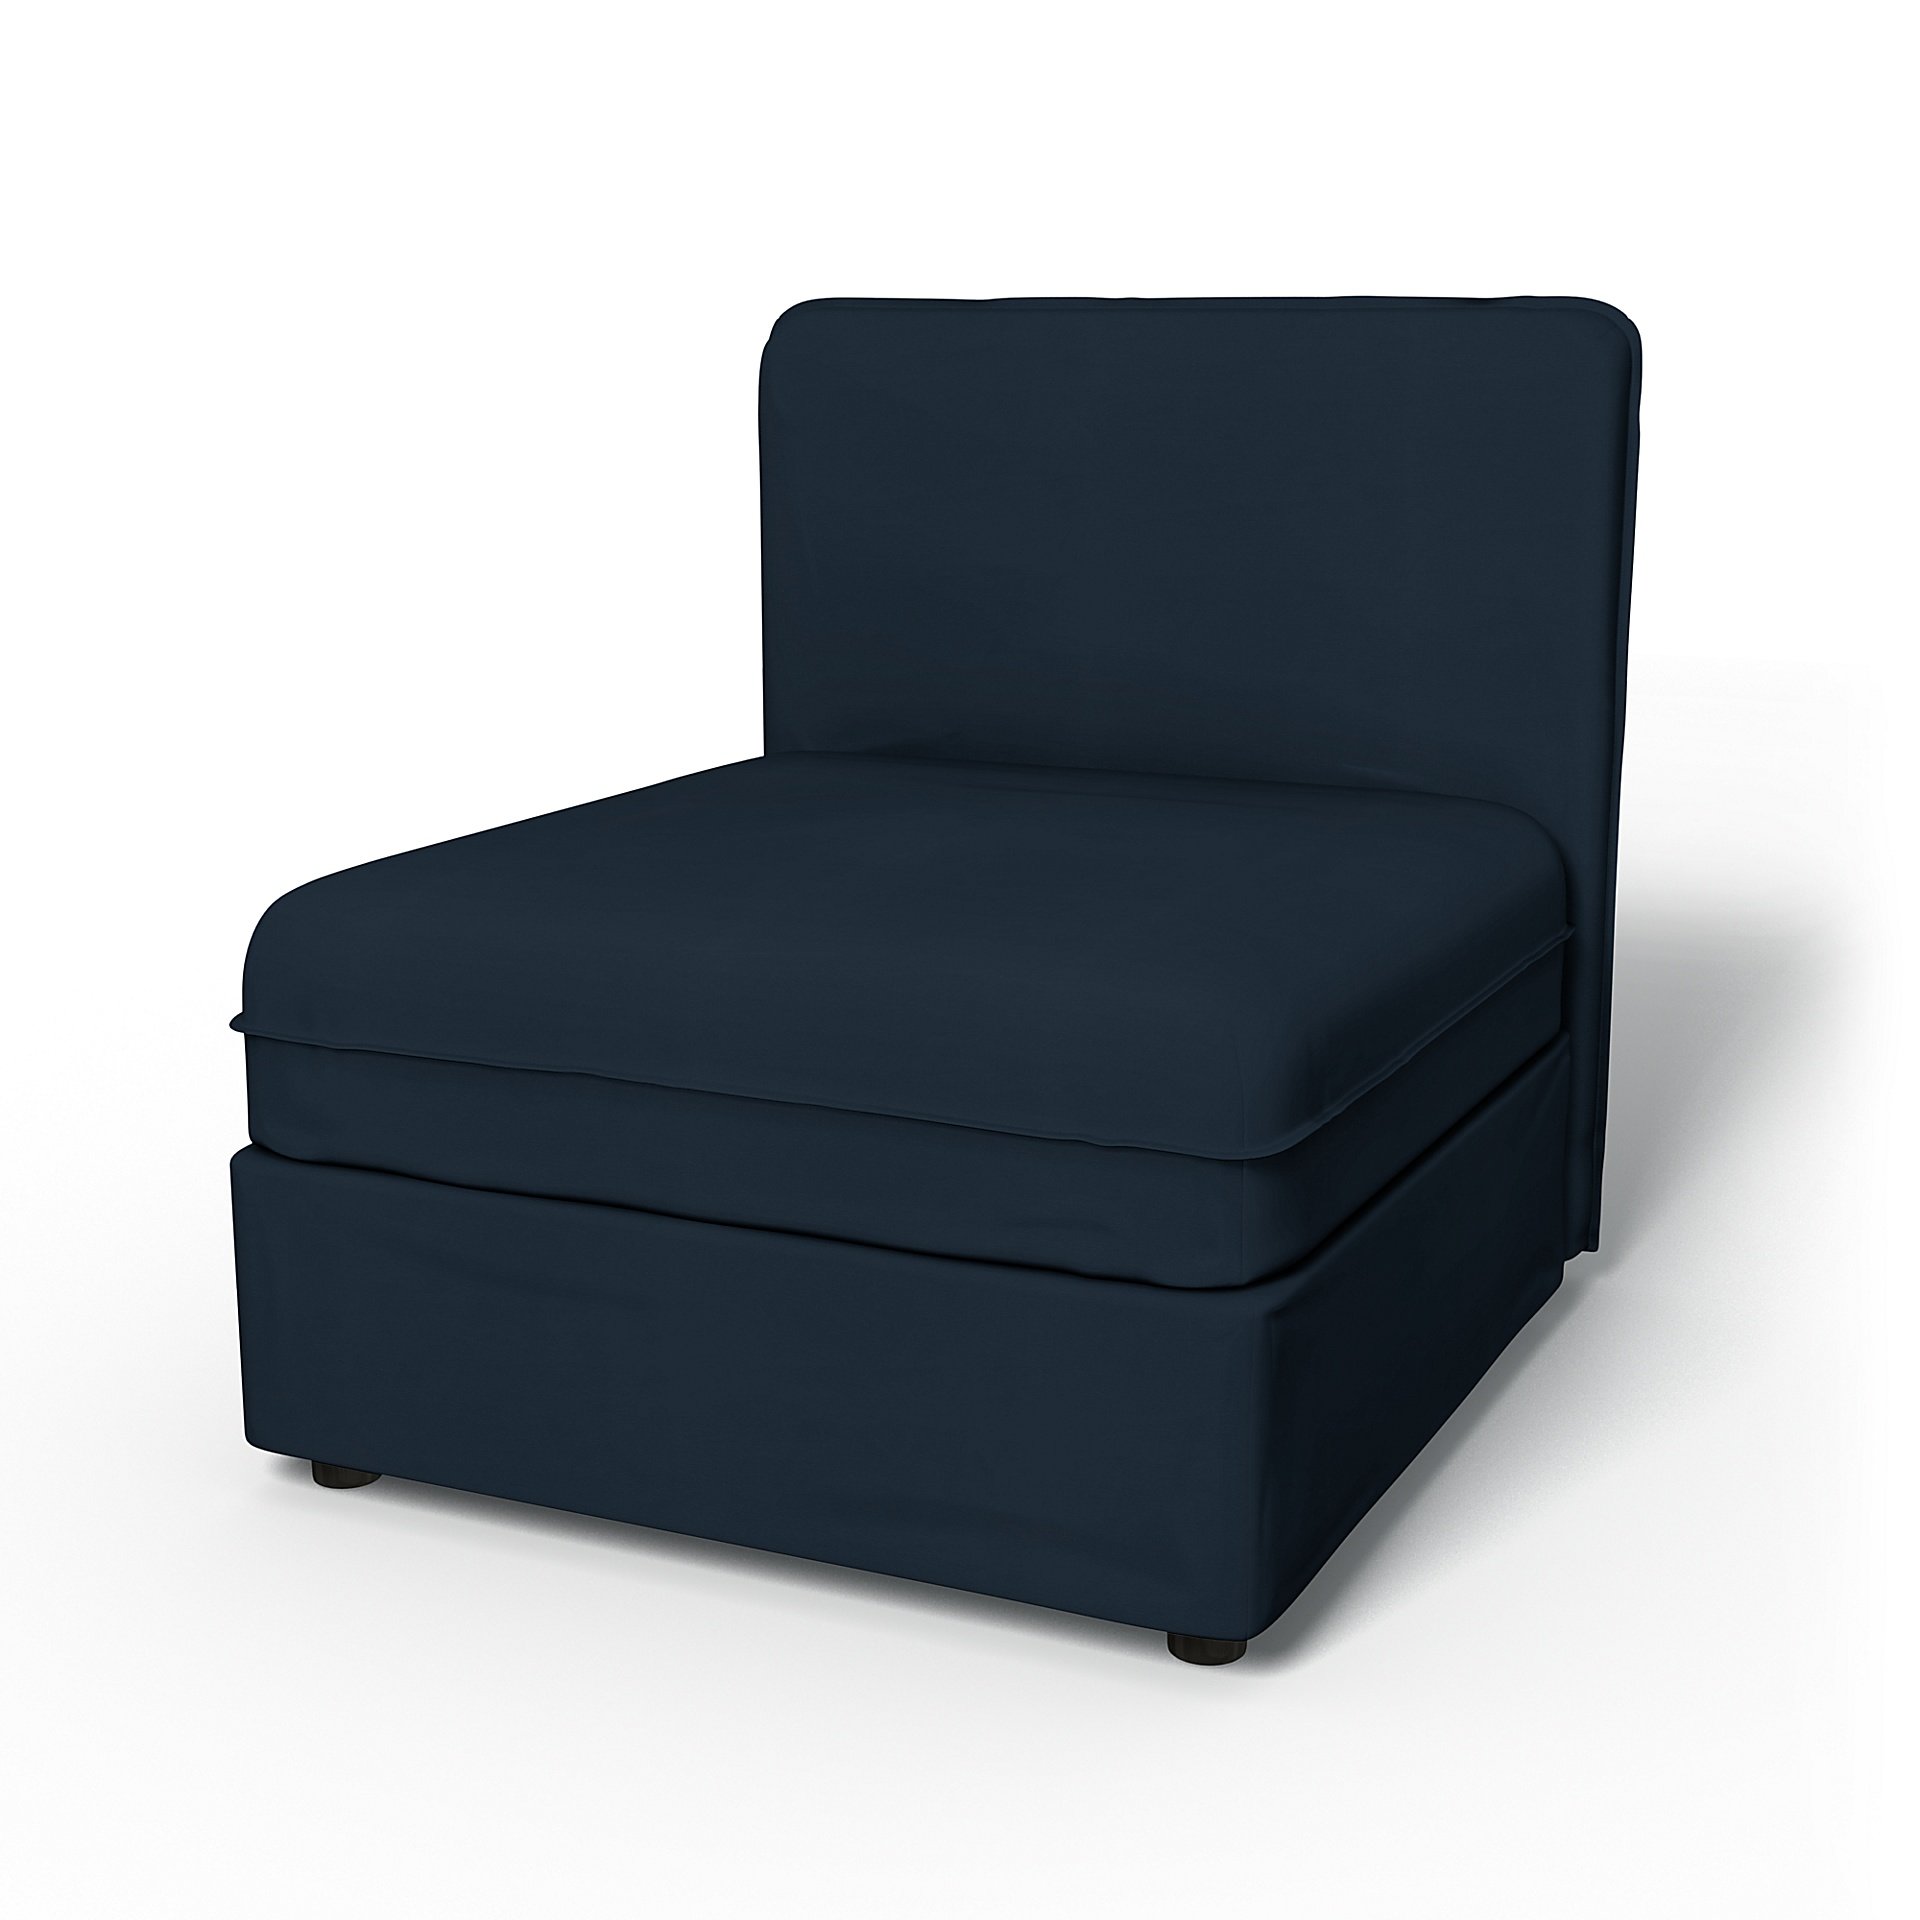 IKEA - Vallentuna Seat Module with Low Back Cover 80x80cm 32x32in, Navy Blue, Cotton - Bemz